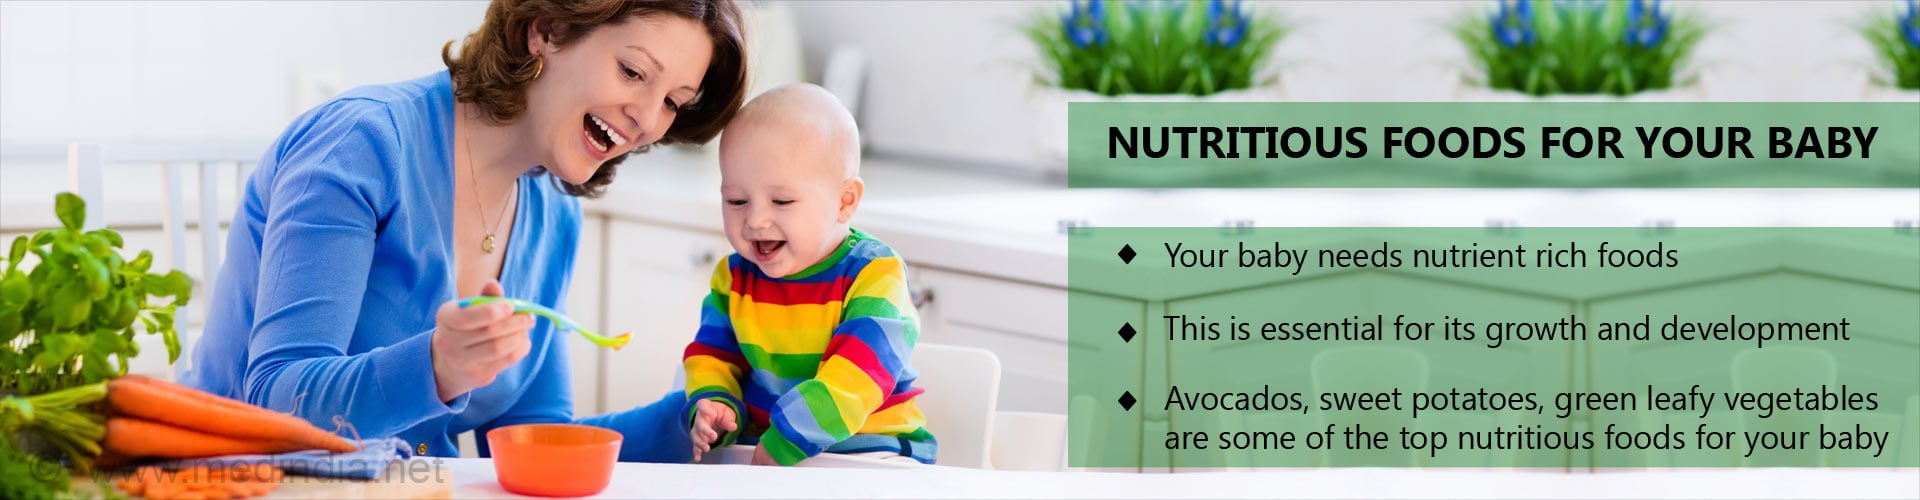 Nutritious foods for your baby
- Your baby needs nutrient rich foods
- This is essential for its growth and development
- Avacados, sweet potatoes, green leafy vegetables are some of the top nutritious foods for your baby